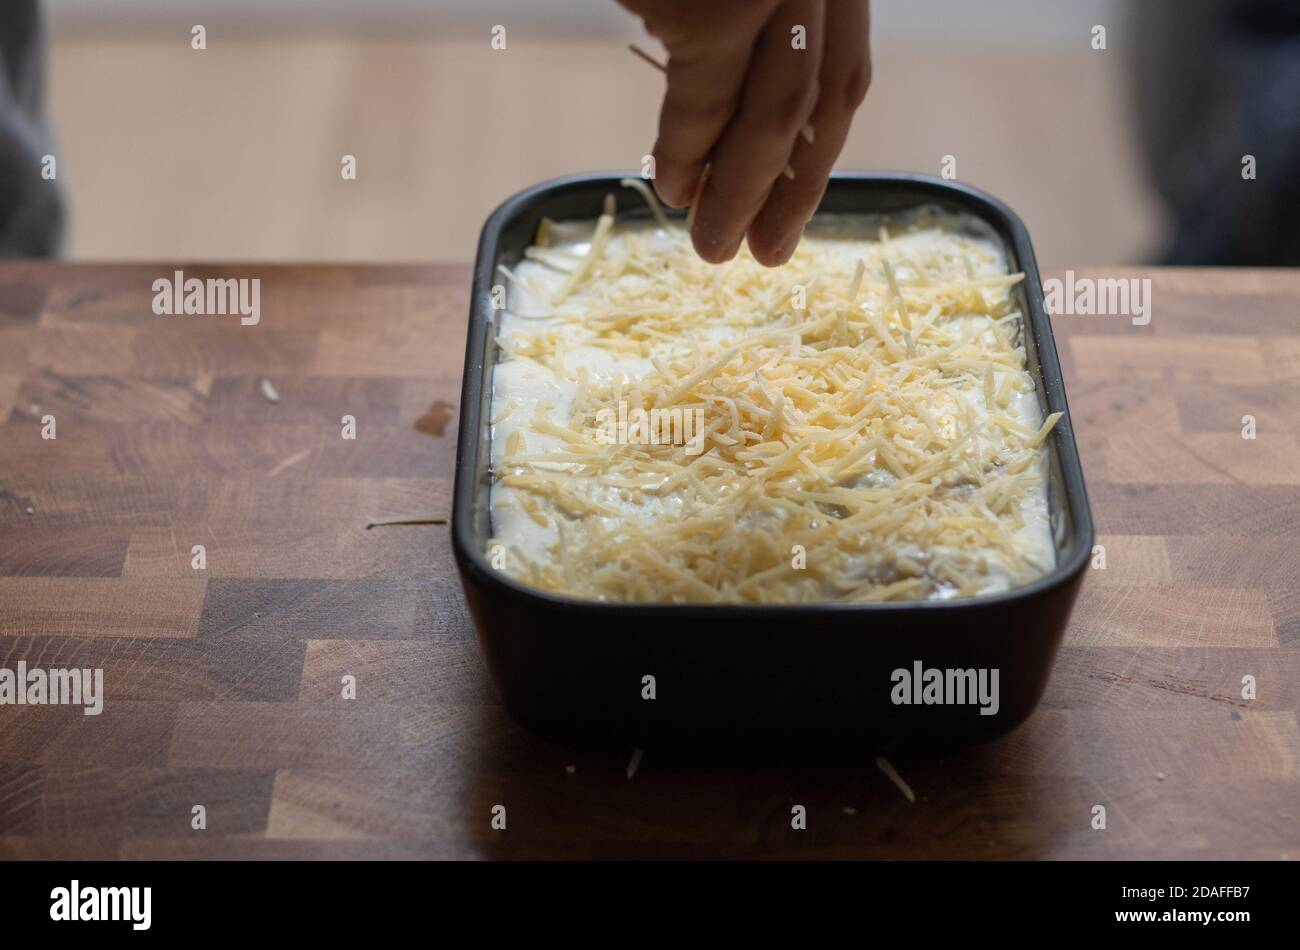 Preparing lasagne, hand pouring grated cheese Stock Photo